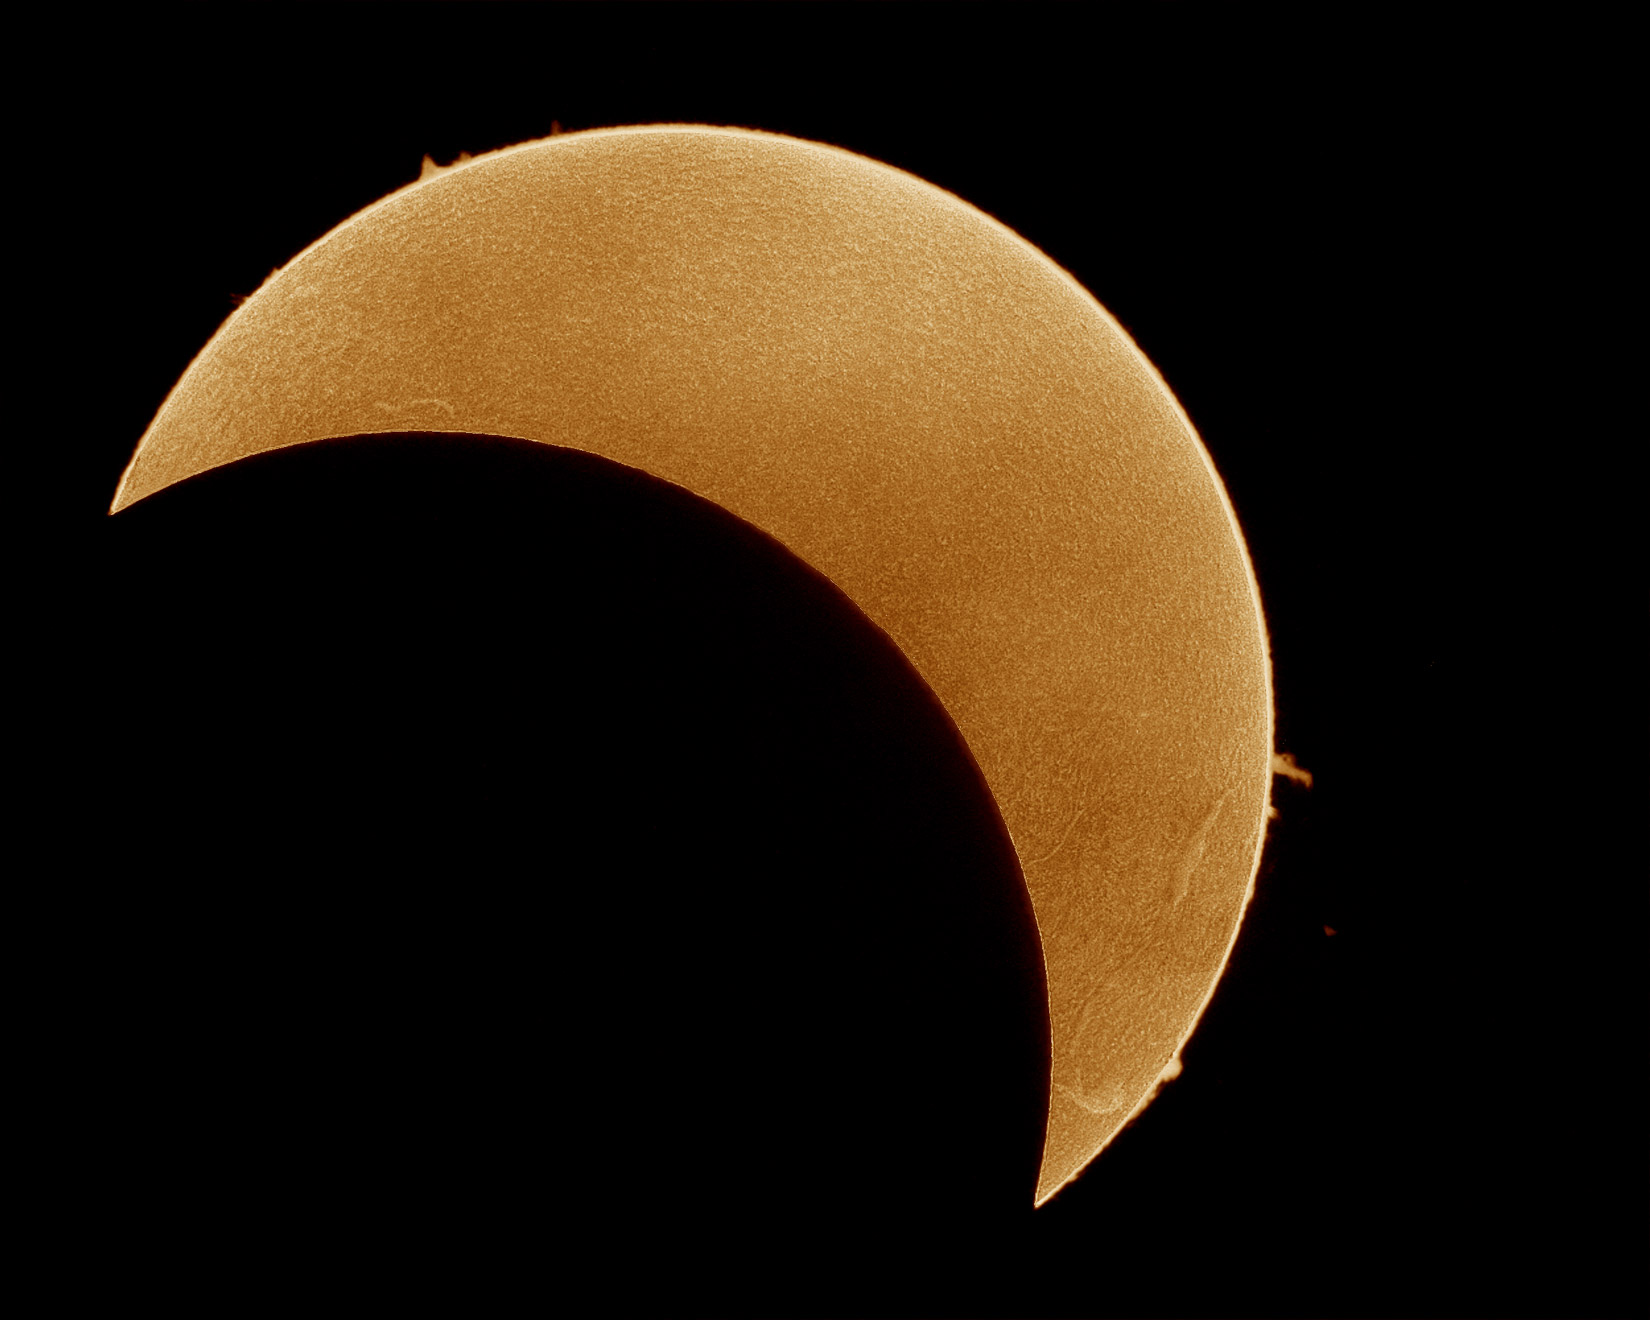 Partial eclipse photographed from Talmassons: 230 KB; click on the image to enlarge